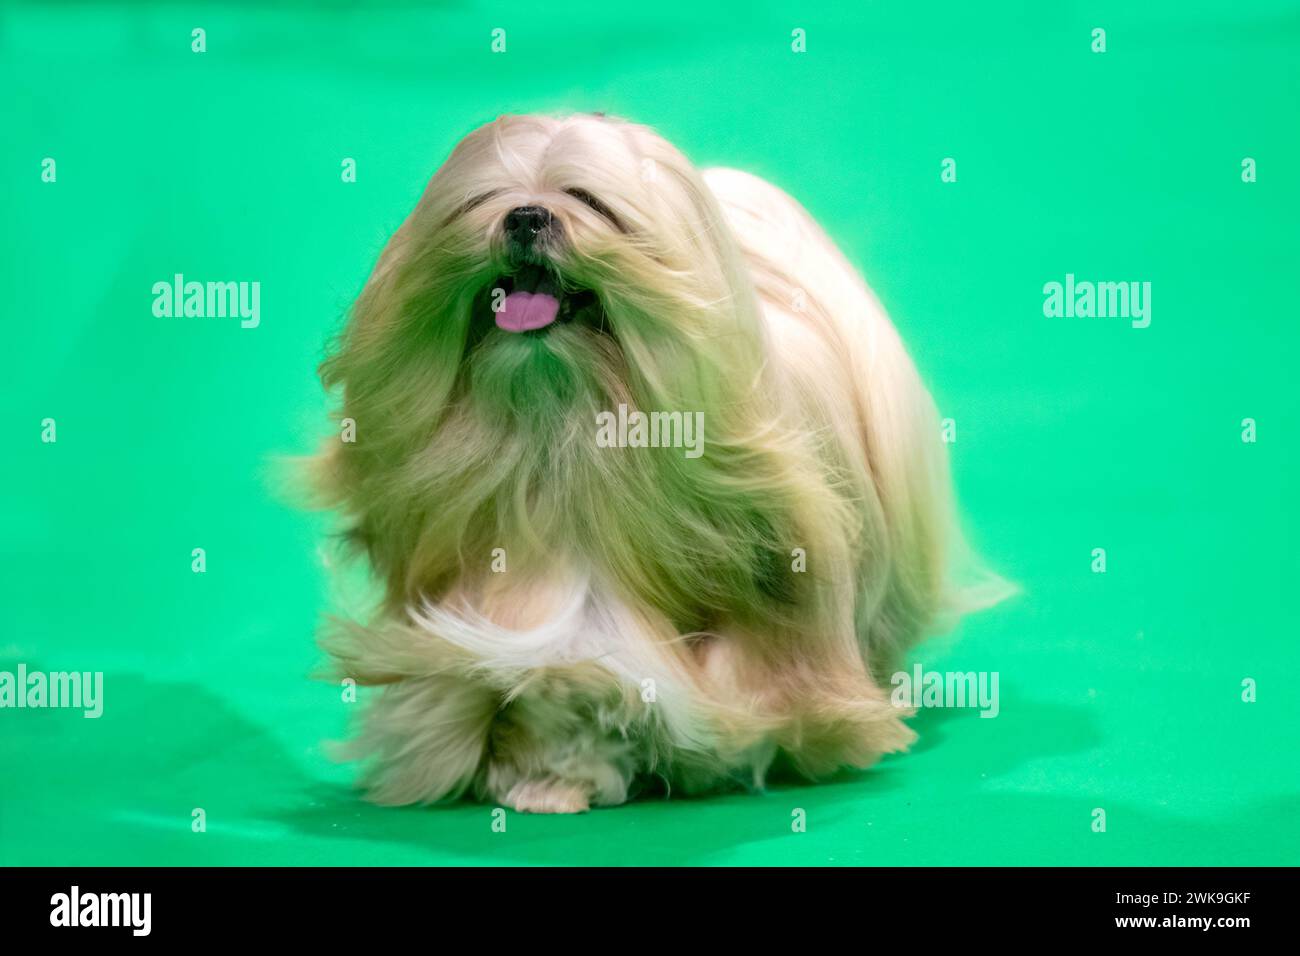 Long haired gold Lhasa Apso dog at Crufts dog show Stock Photo